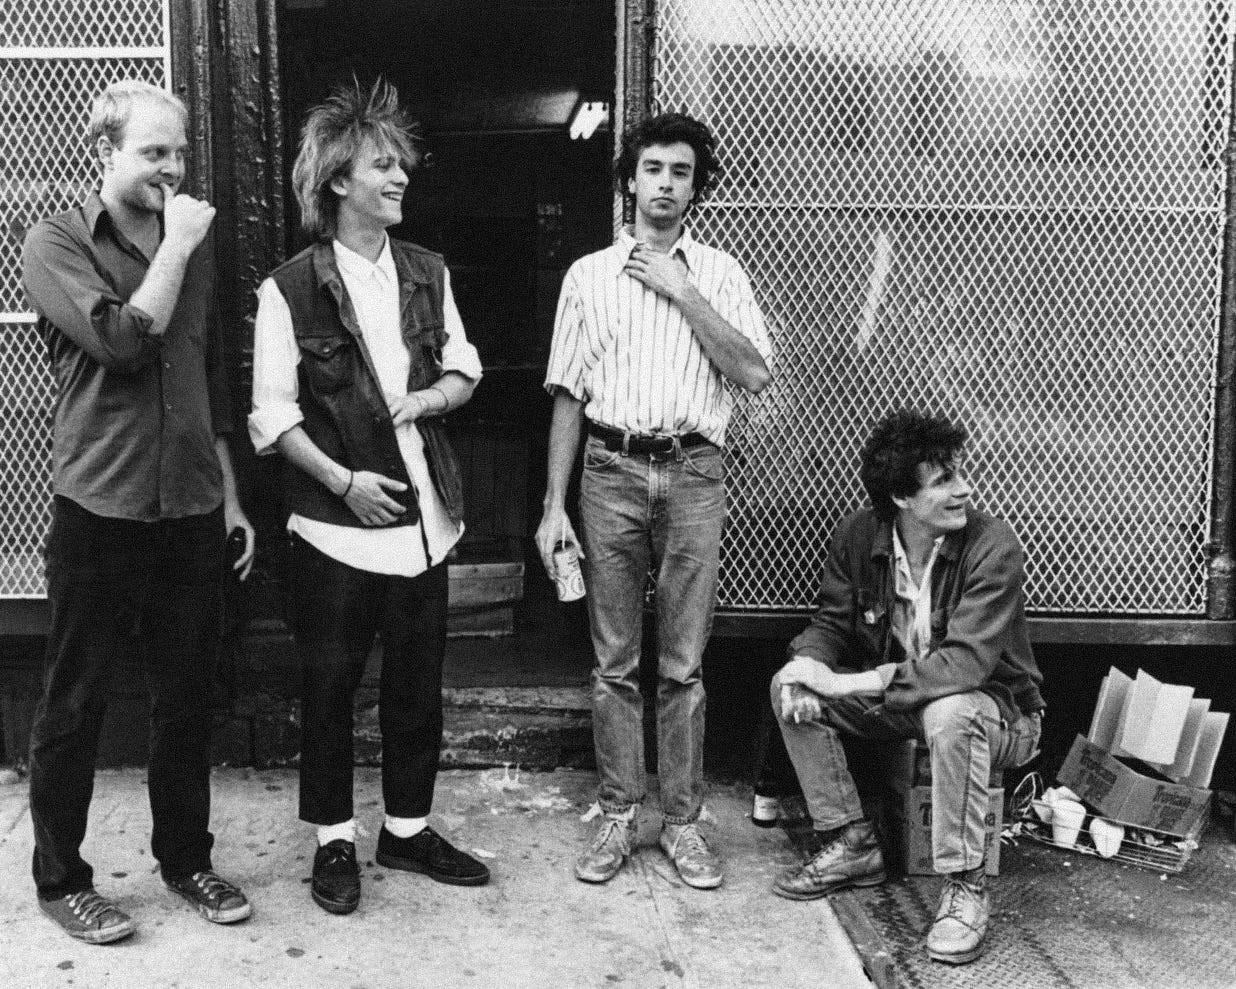 The members of the Replacements in front of a chain link fence.